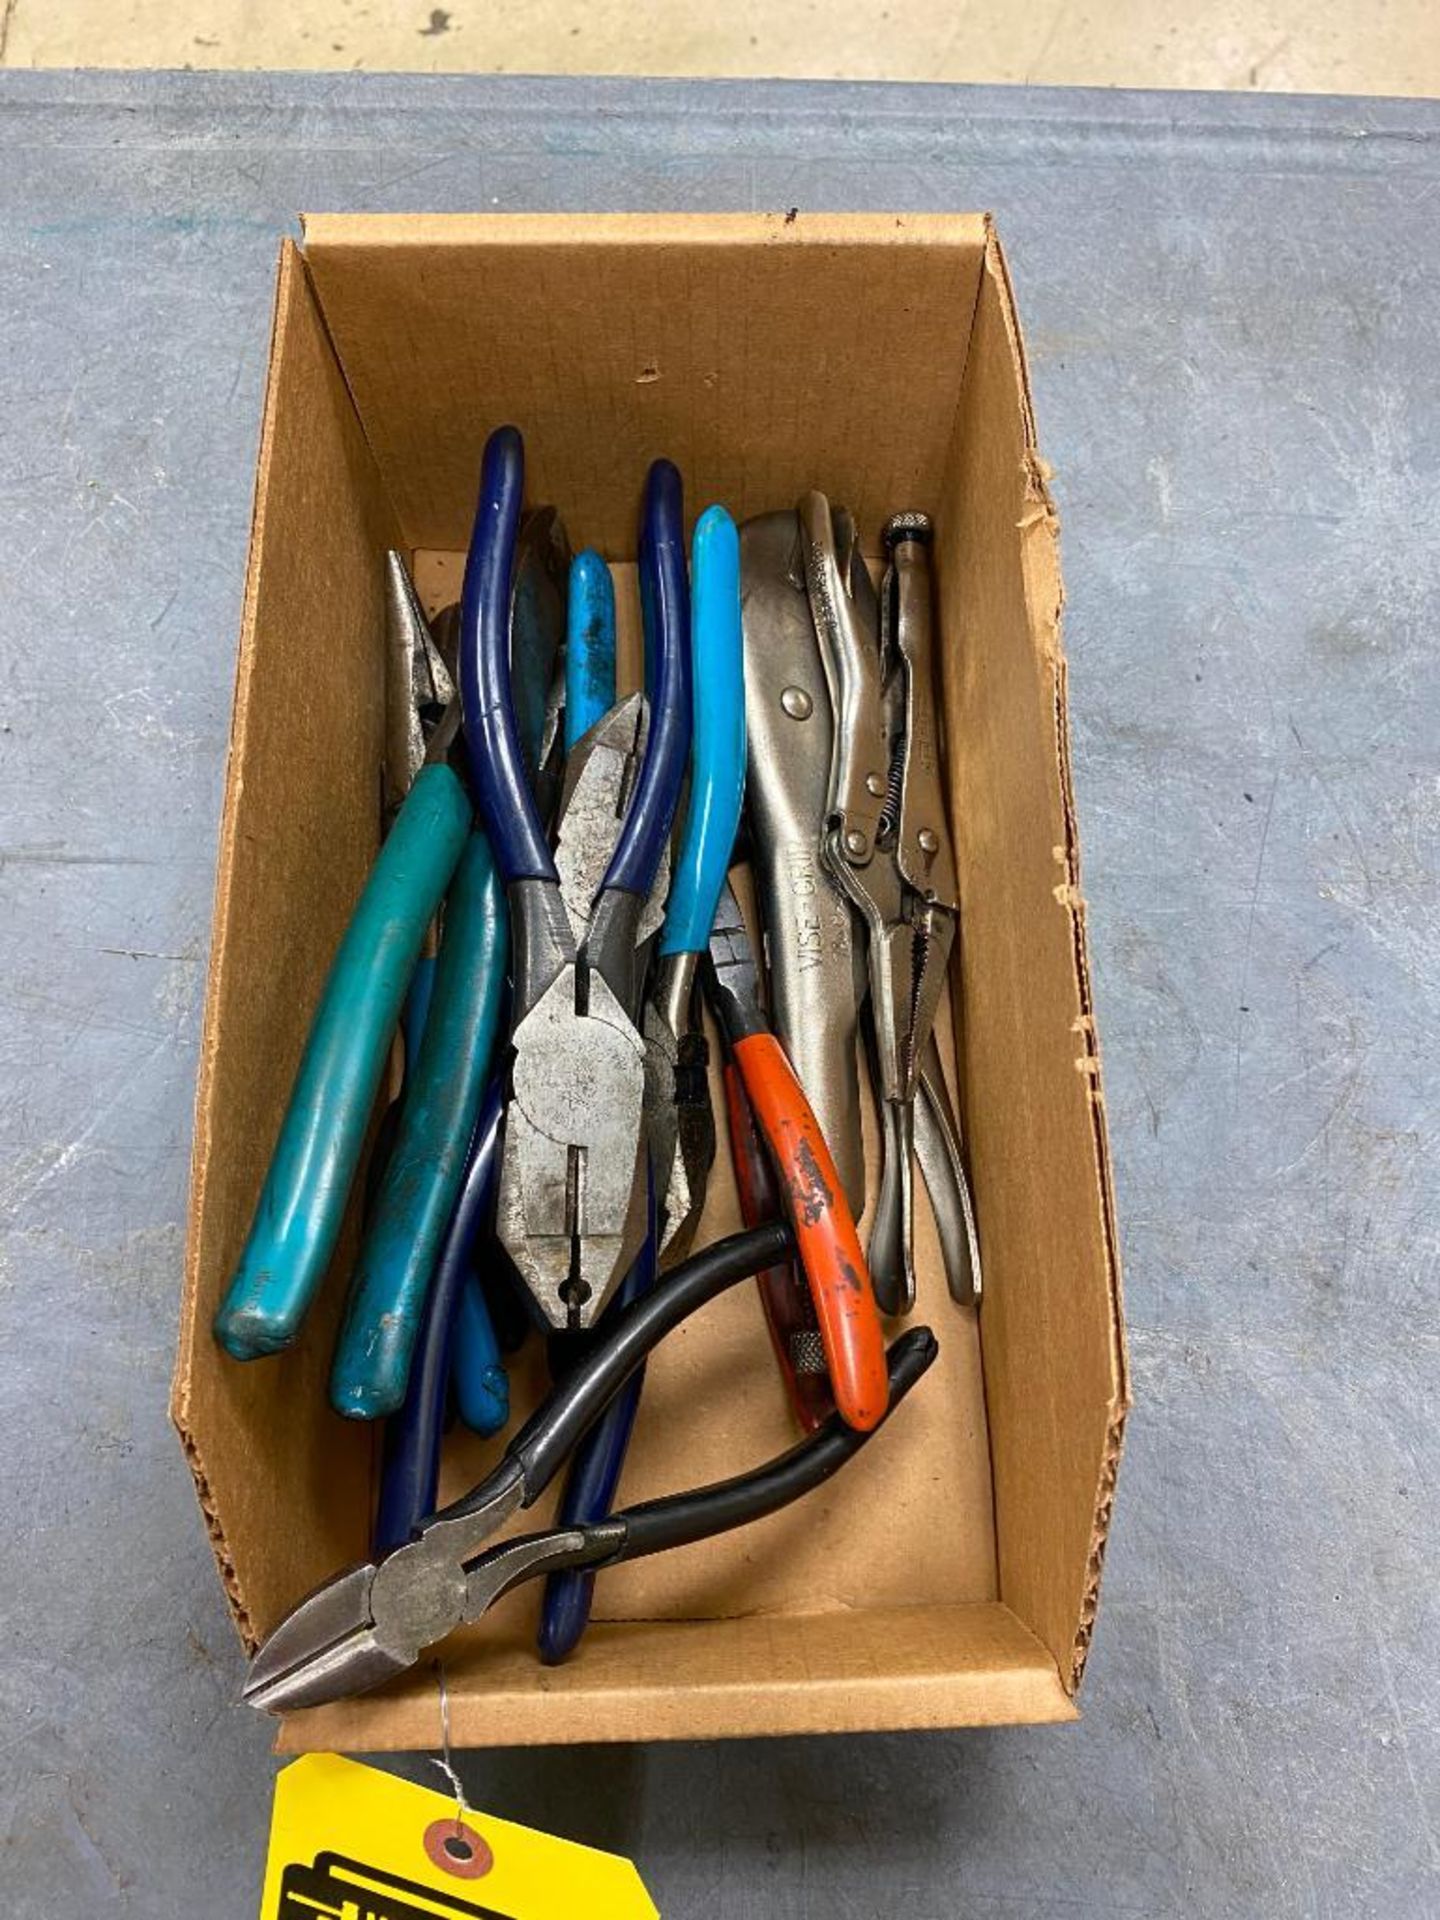 BOX OF VISE GRIPS, NEEDLE NOSE PLIERS, DIKES